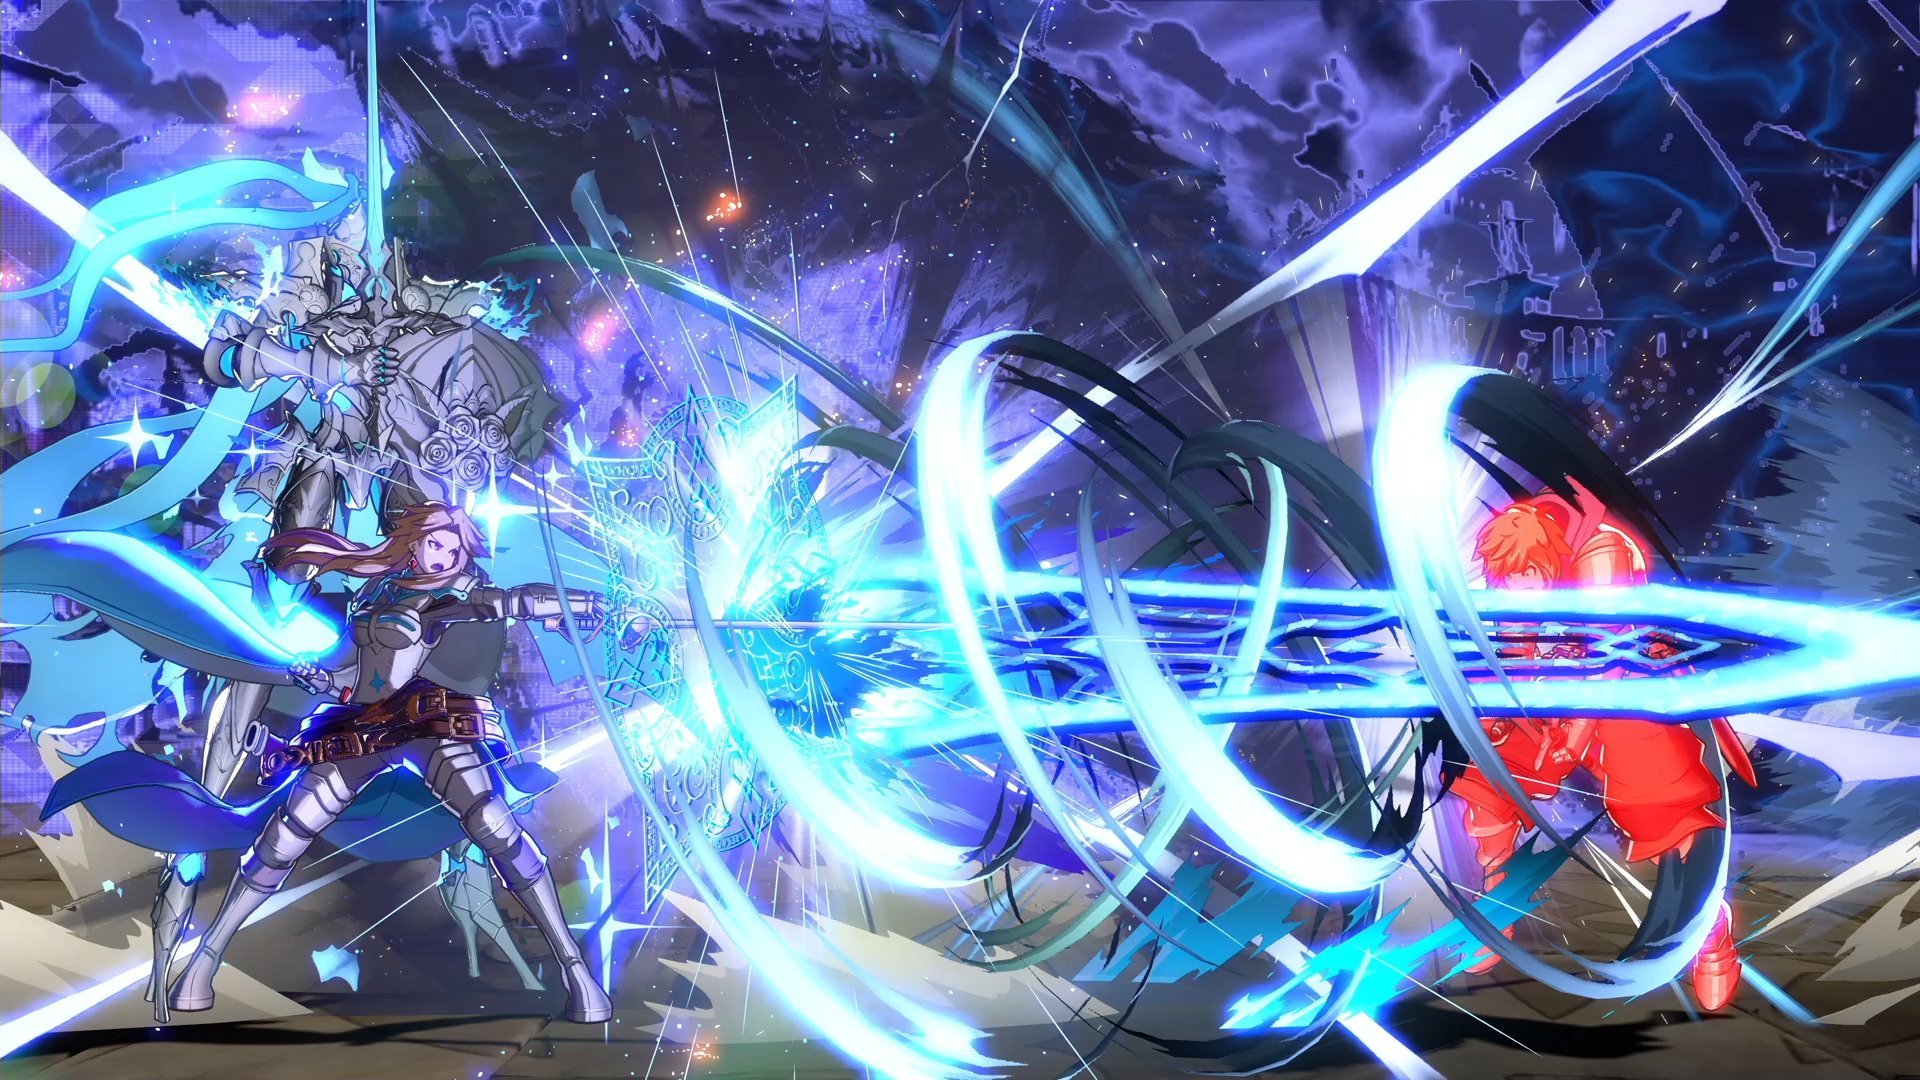 Granblue Fantasy Versus: Rising release date has been delayed